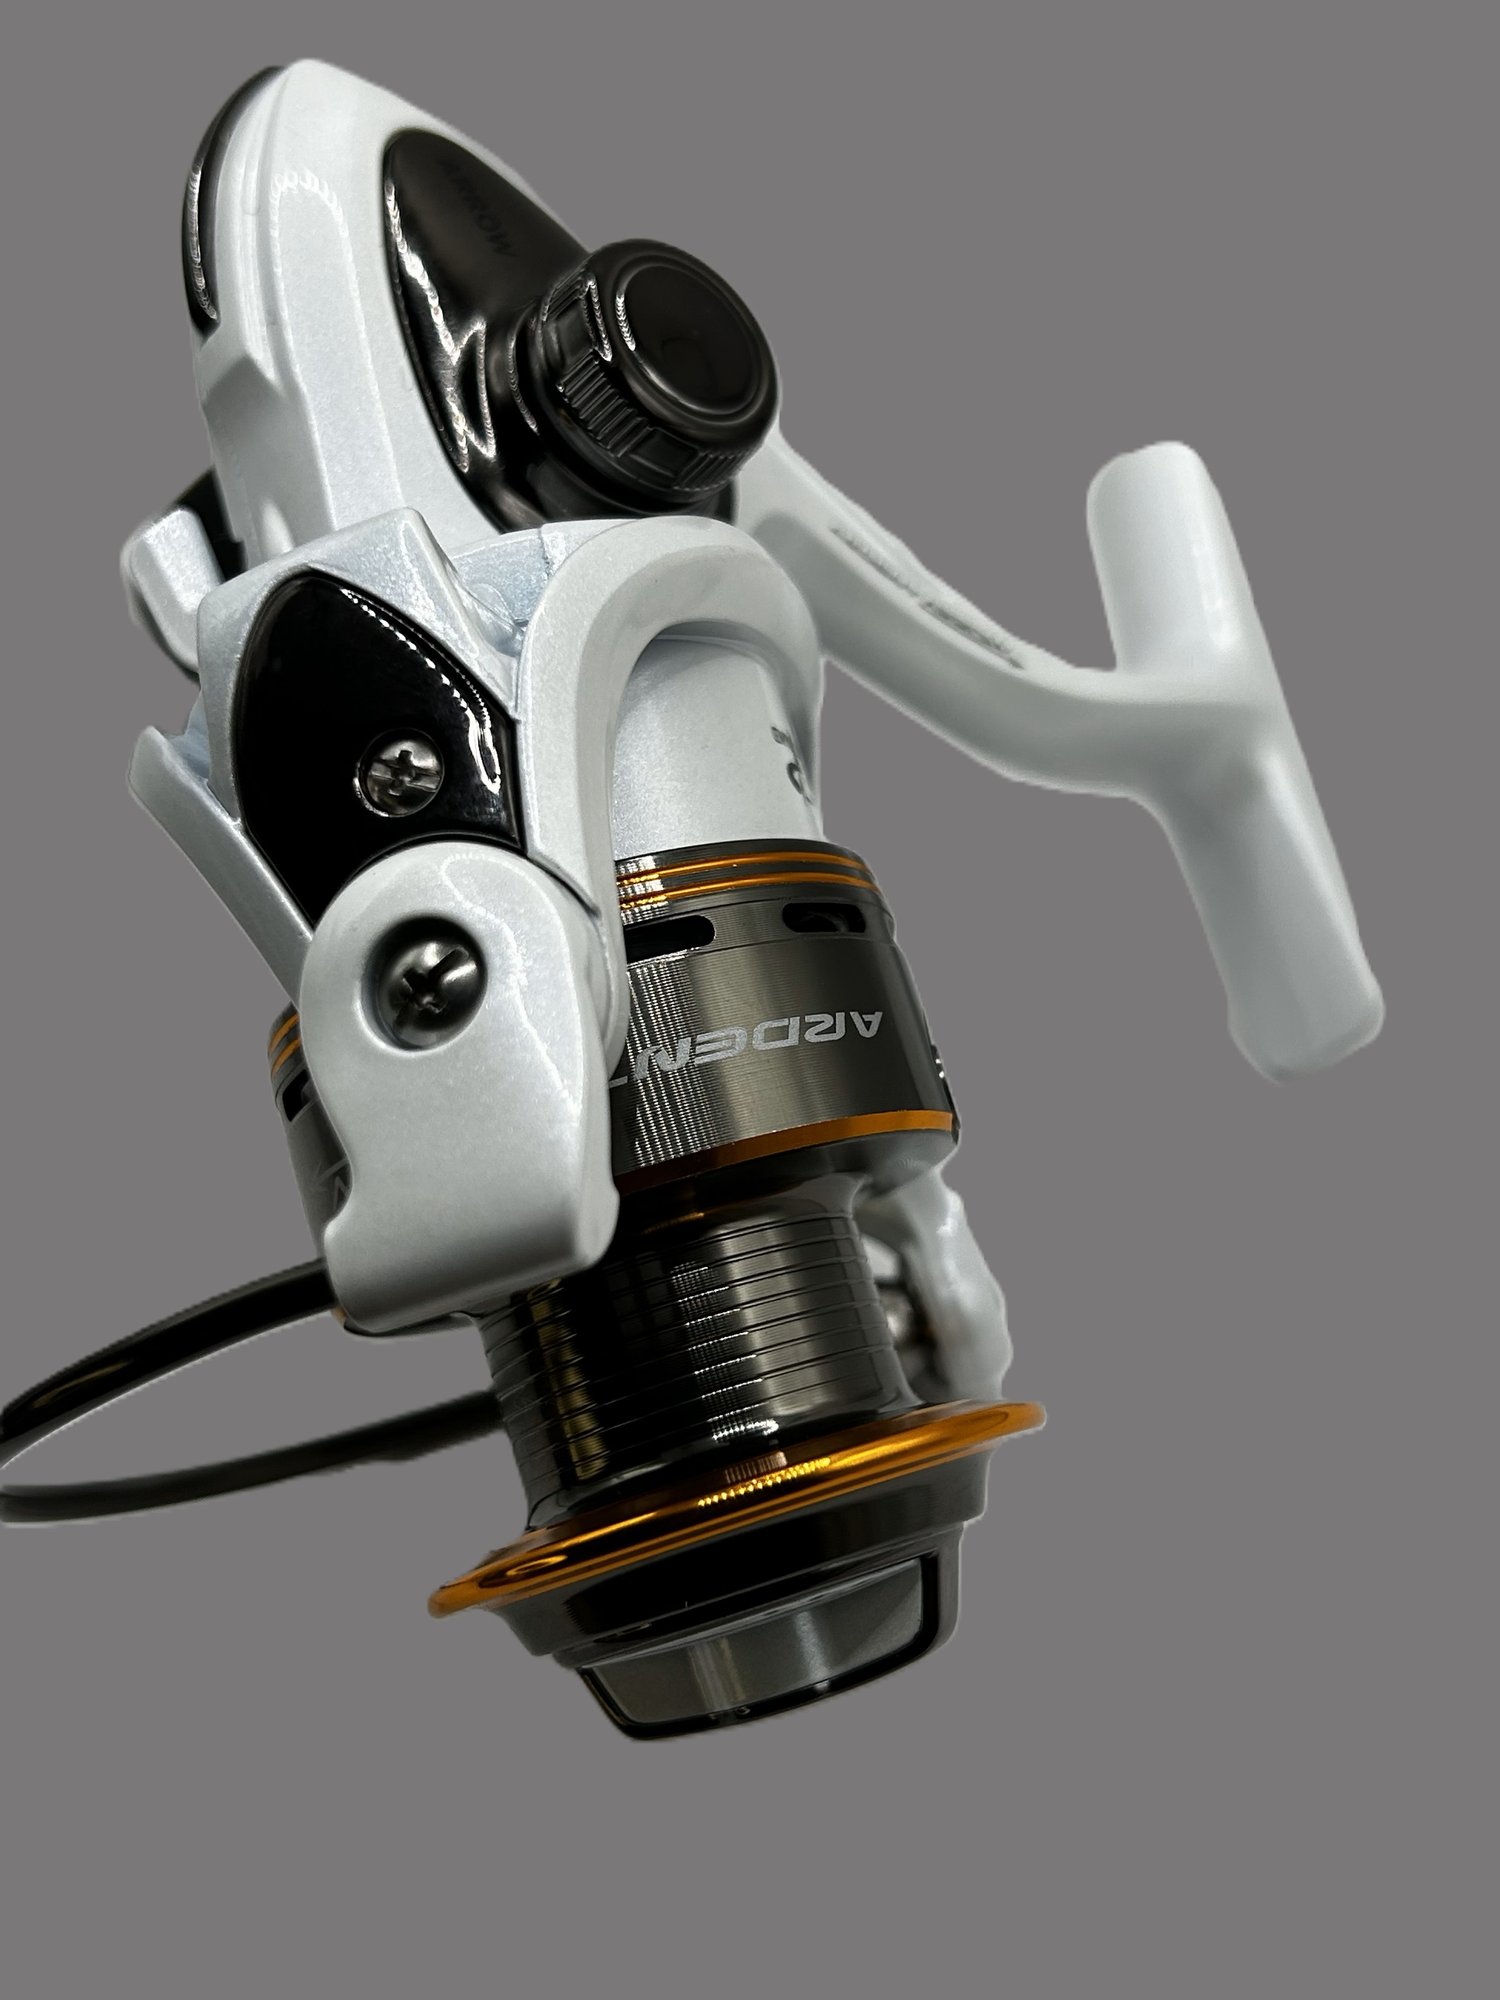 Ardent Arrow Spinning Reel SKU 252266 • Prices »